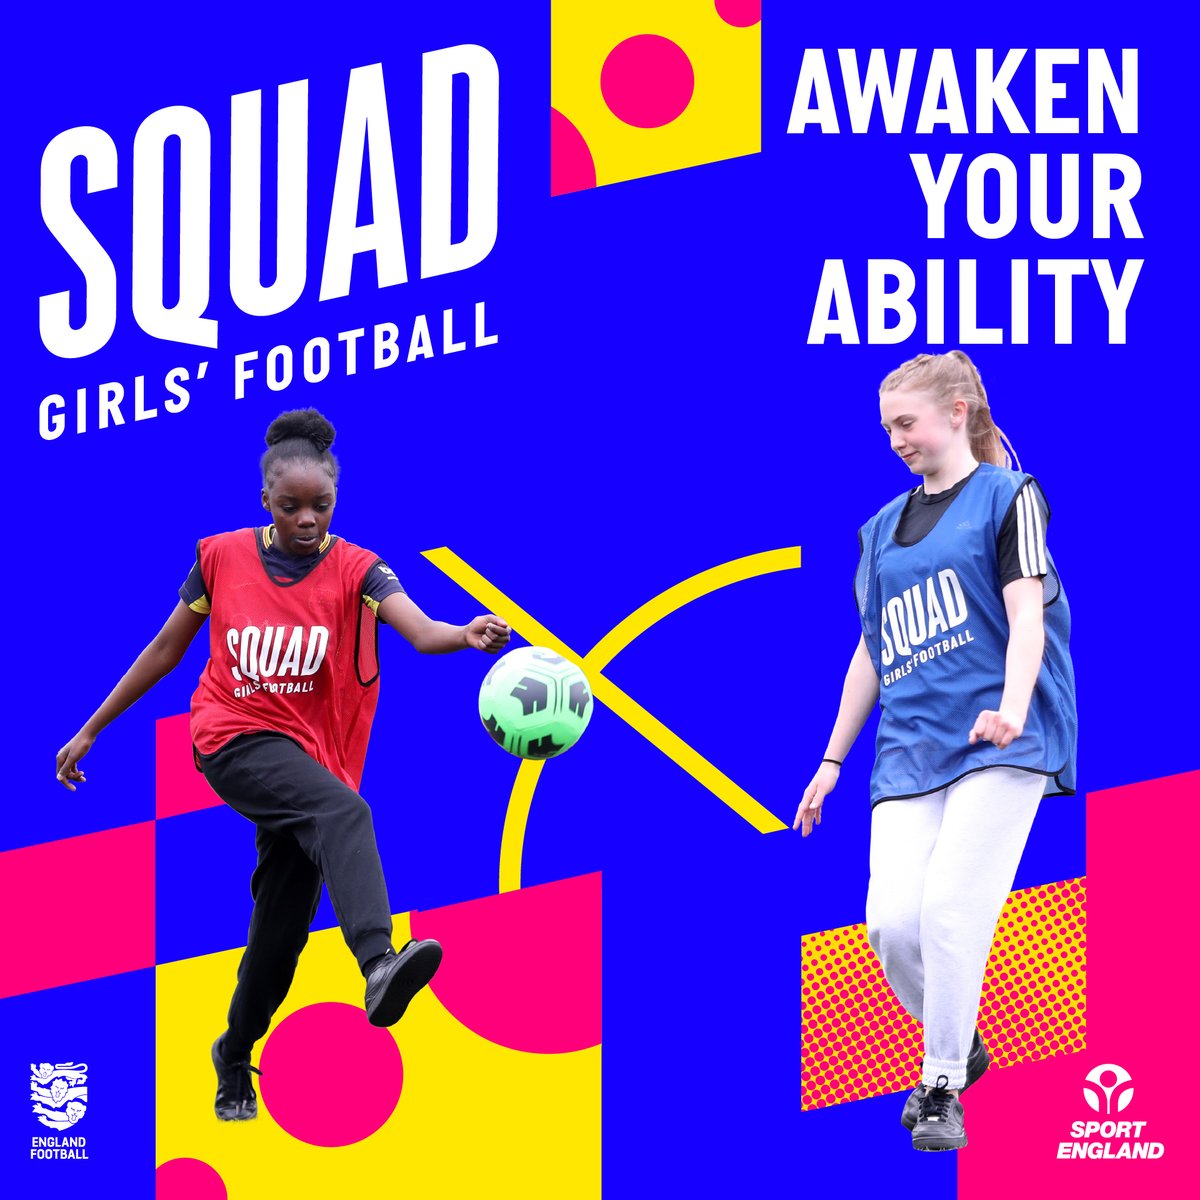 Grow the girl's game at your club with Weetabix Wildcats or Squad Girls Football! 

Find out more and apply to run a session here: 
wiltshirefa.com/news/2023/jan/…

🐯✌️⚽️

#WiltshireFootball #WeetabixWildcats #SquadGirls #LetGirlsPlay